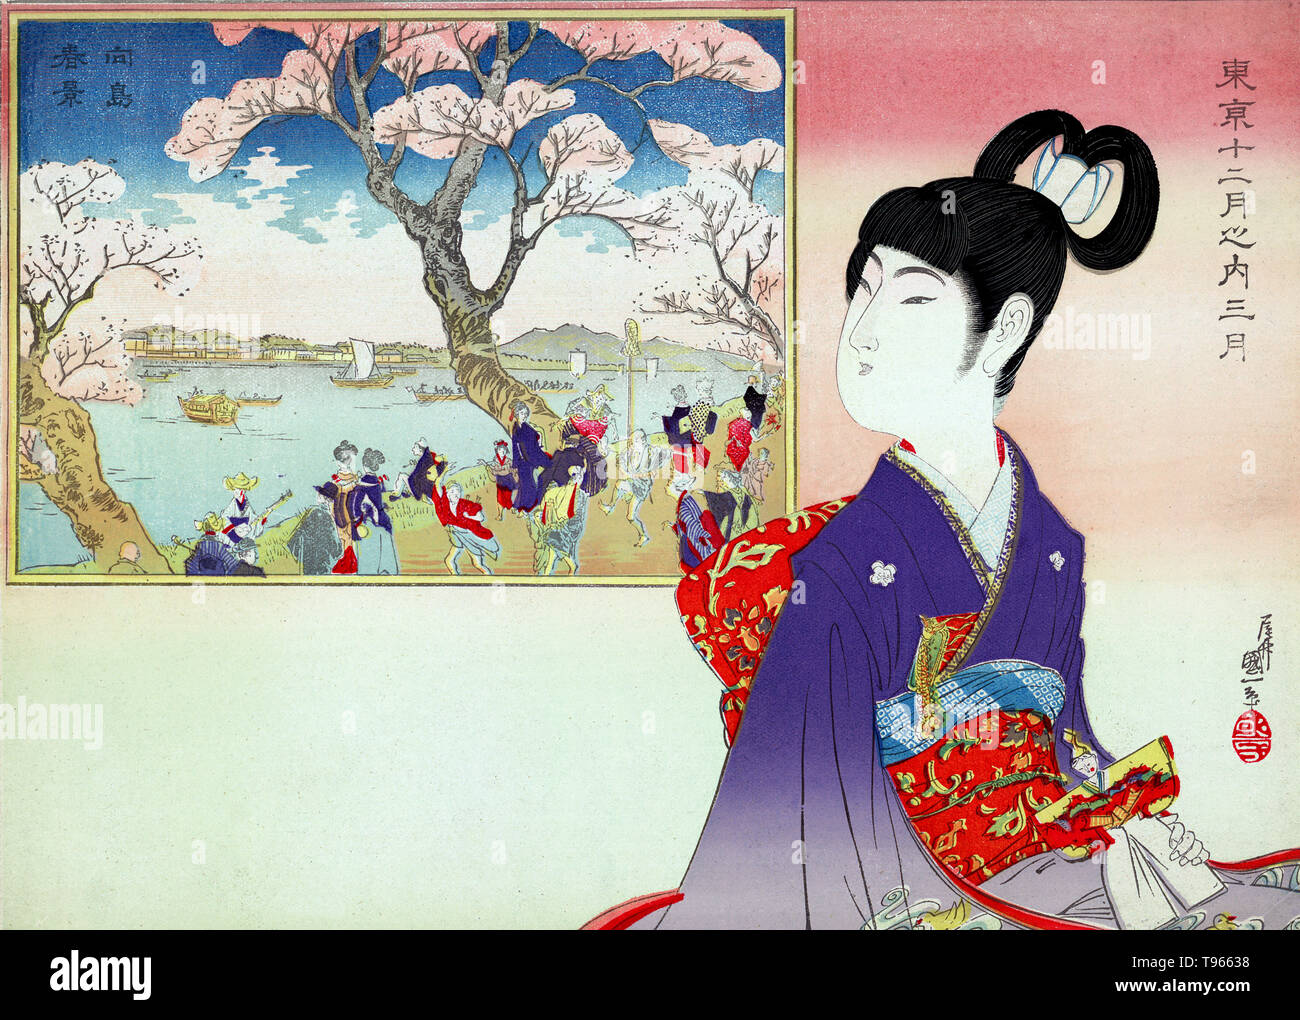 The small landscape depicted celebrates Mukojima situated on the east bank of the Sumida River. This is still a famous destination for viewing the cherry blossom trees that were first planted there by Shogun Tokugawa Yoshimune (1684-1751). The fashionable young girl in the foreground is holding what is likely an emperor doll associated with the March 3rd Hinamatsuri or Girls Day festival. Kunikazu was a student of Utagawa Kunimasa and the oldest of three artist brothers. Stock Photo